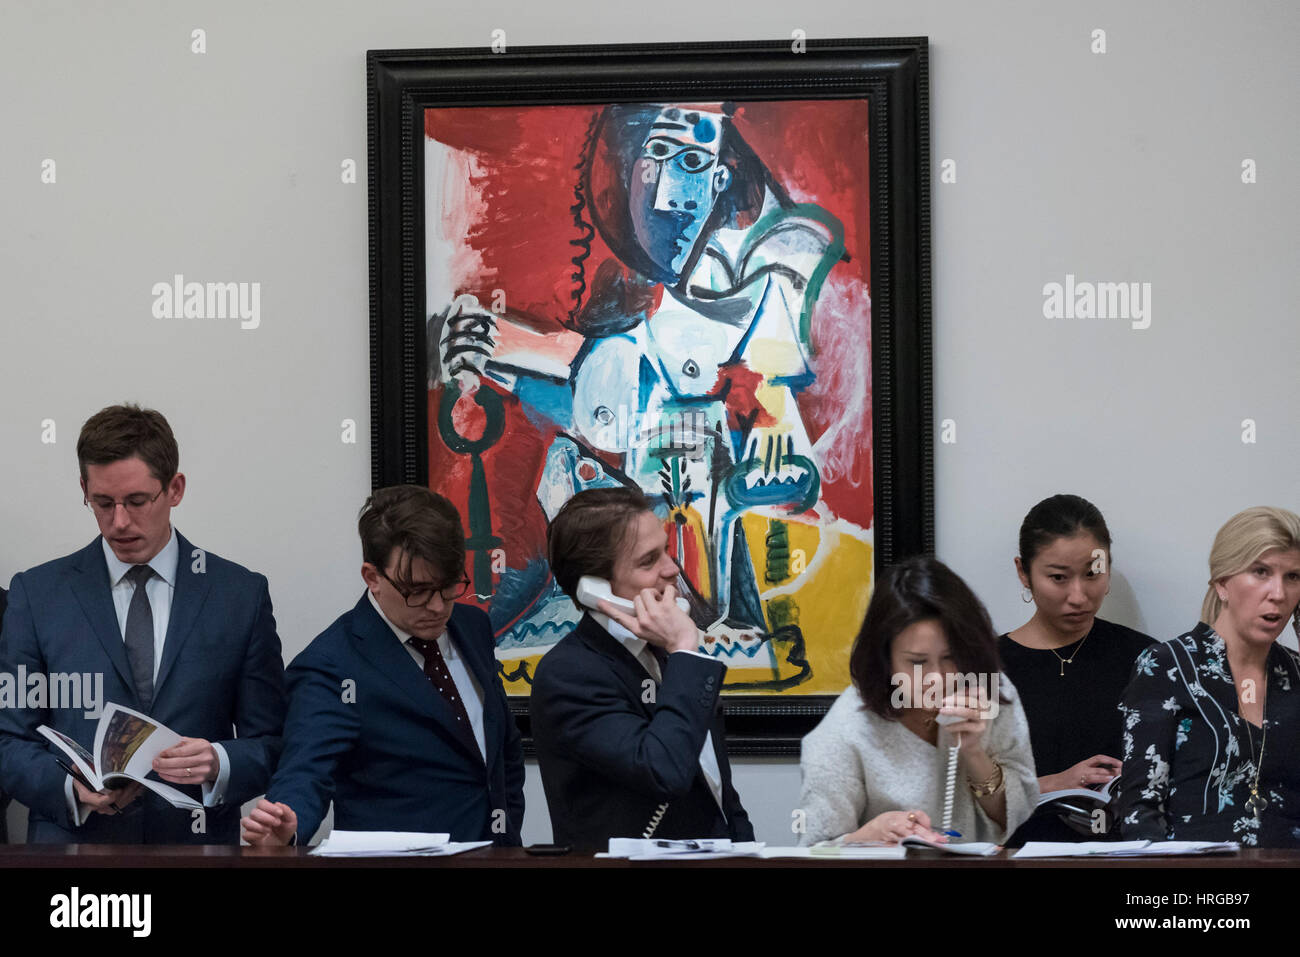 London, UK.  1 March 2017. Sotheby's staff, bidding on behalf of telephone clients, stand in front of 'Femme Nue Assise' by Pablo Picasso which sold for a hammer price of GBP12m (est. GBP9.5-12.5m) at the evening sale of Impressionist and Surrealist Art at Sotheby's in New Bond Street.  Credit: Stephen Chung / Alamy Live News Stock Photo